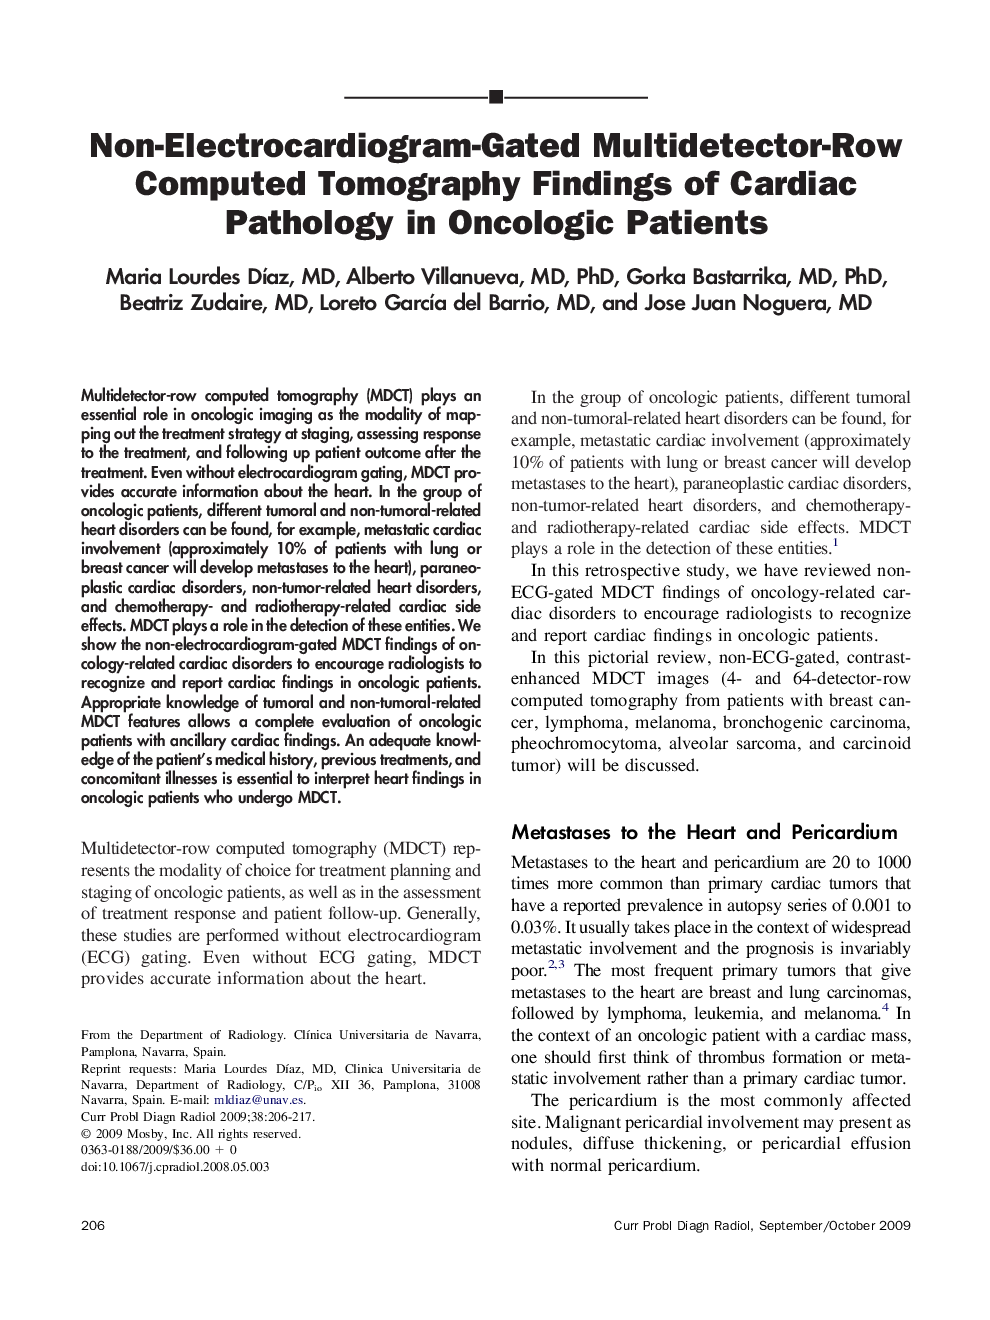 Non-Electrocardiogram-Gated Multidetector-Row Computed Tomography Findings of Cardiac Pathology in Oncologic Patients